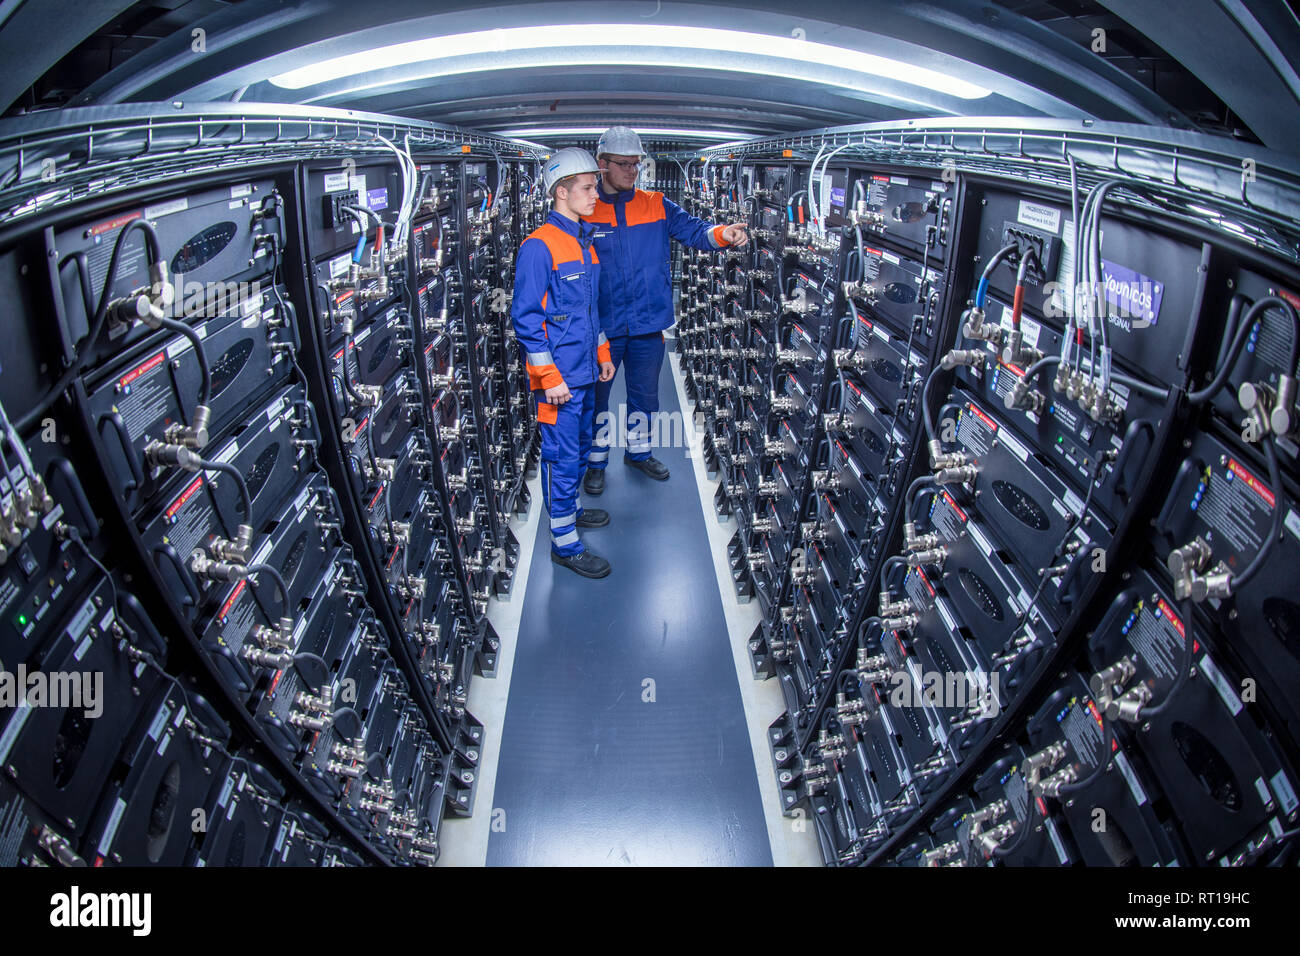 25 February 2019, Mecklenburg-Western Pomerania, Schwerin: The trainees Florian Maty (front) Tom Hoffmann are standing in the battery storage of the energy supplier WEMAG. The skilled workers initiative 'Take off in MV' is launching a new campaign to improve the skilled workers situation in Mecklenburg-Western Pomerania. Photo: Jens Büttner/dpa-Zentralbild/ZB Stock Photo